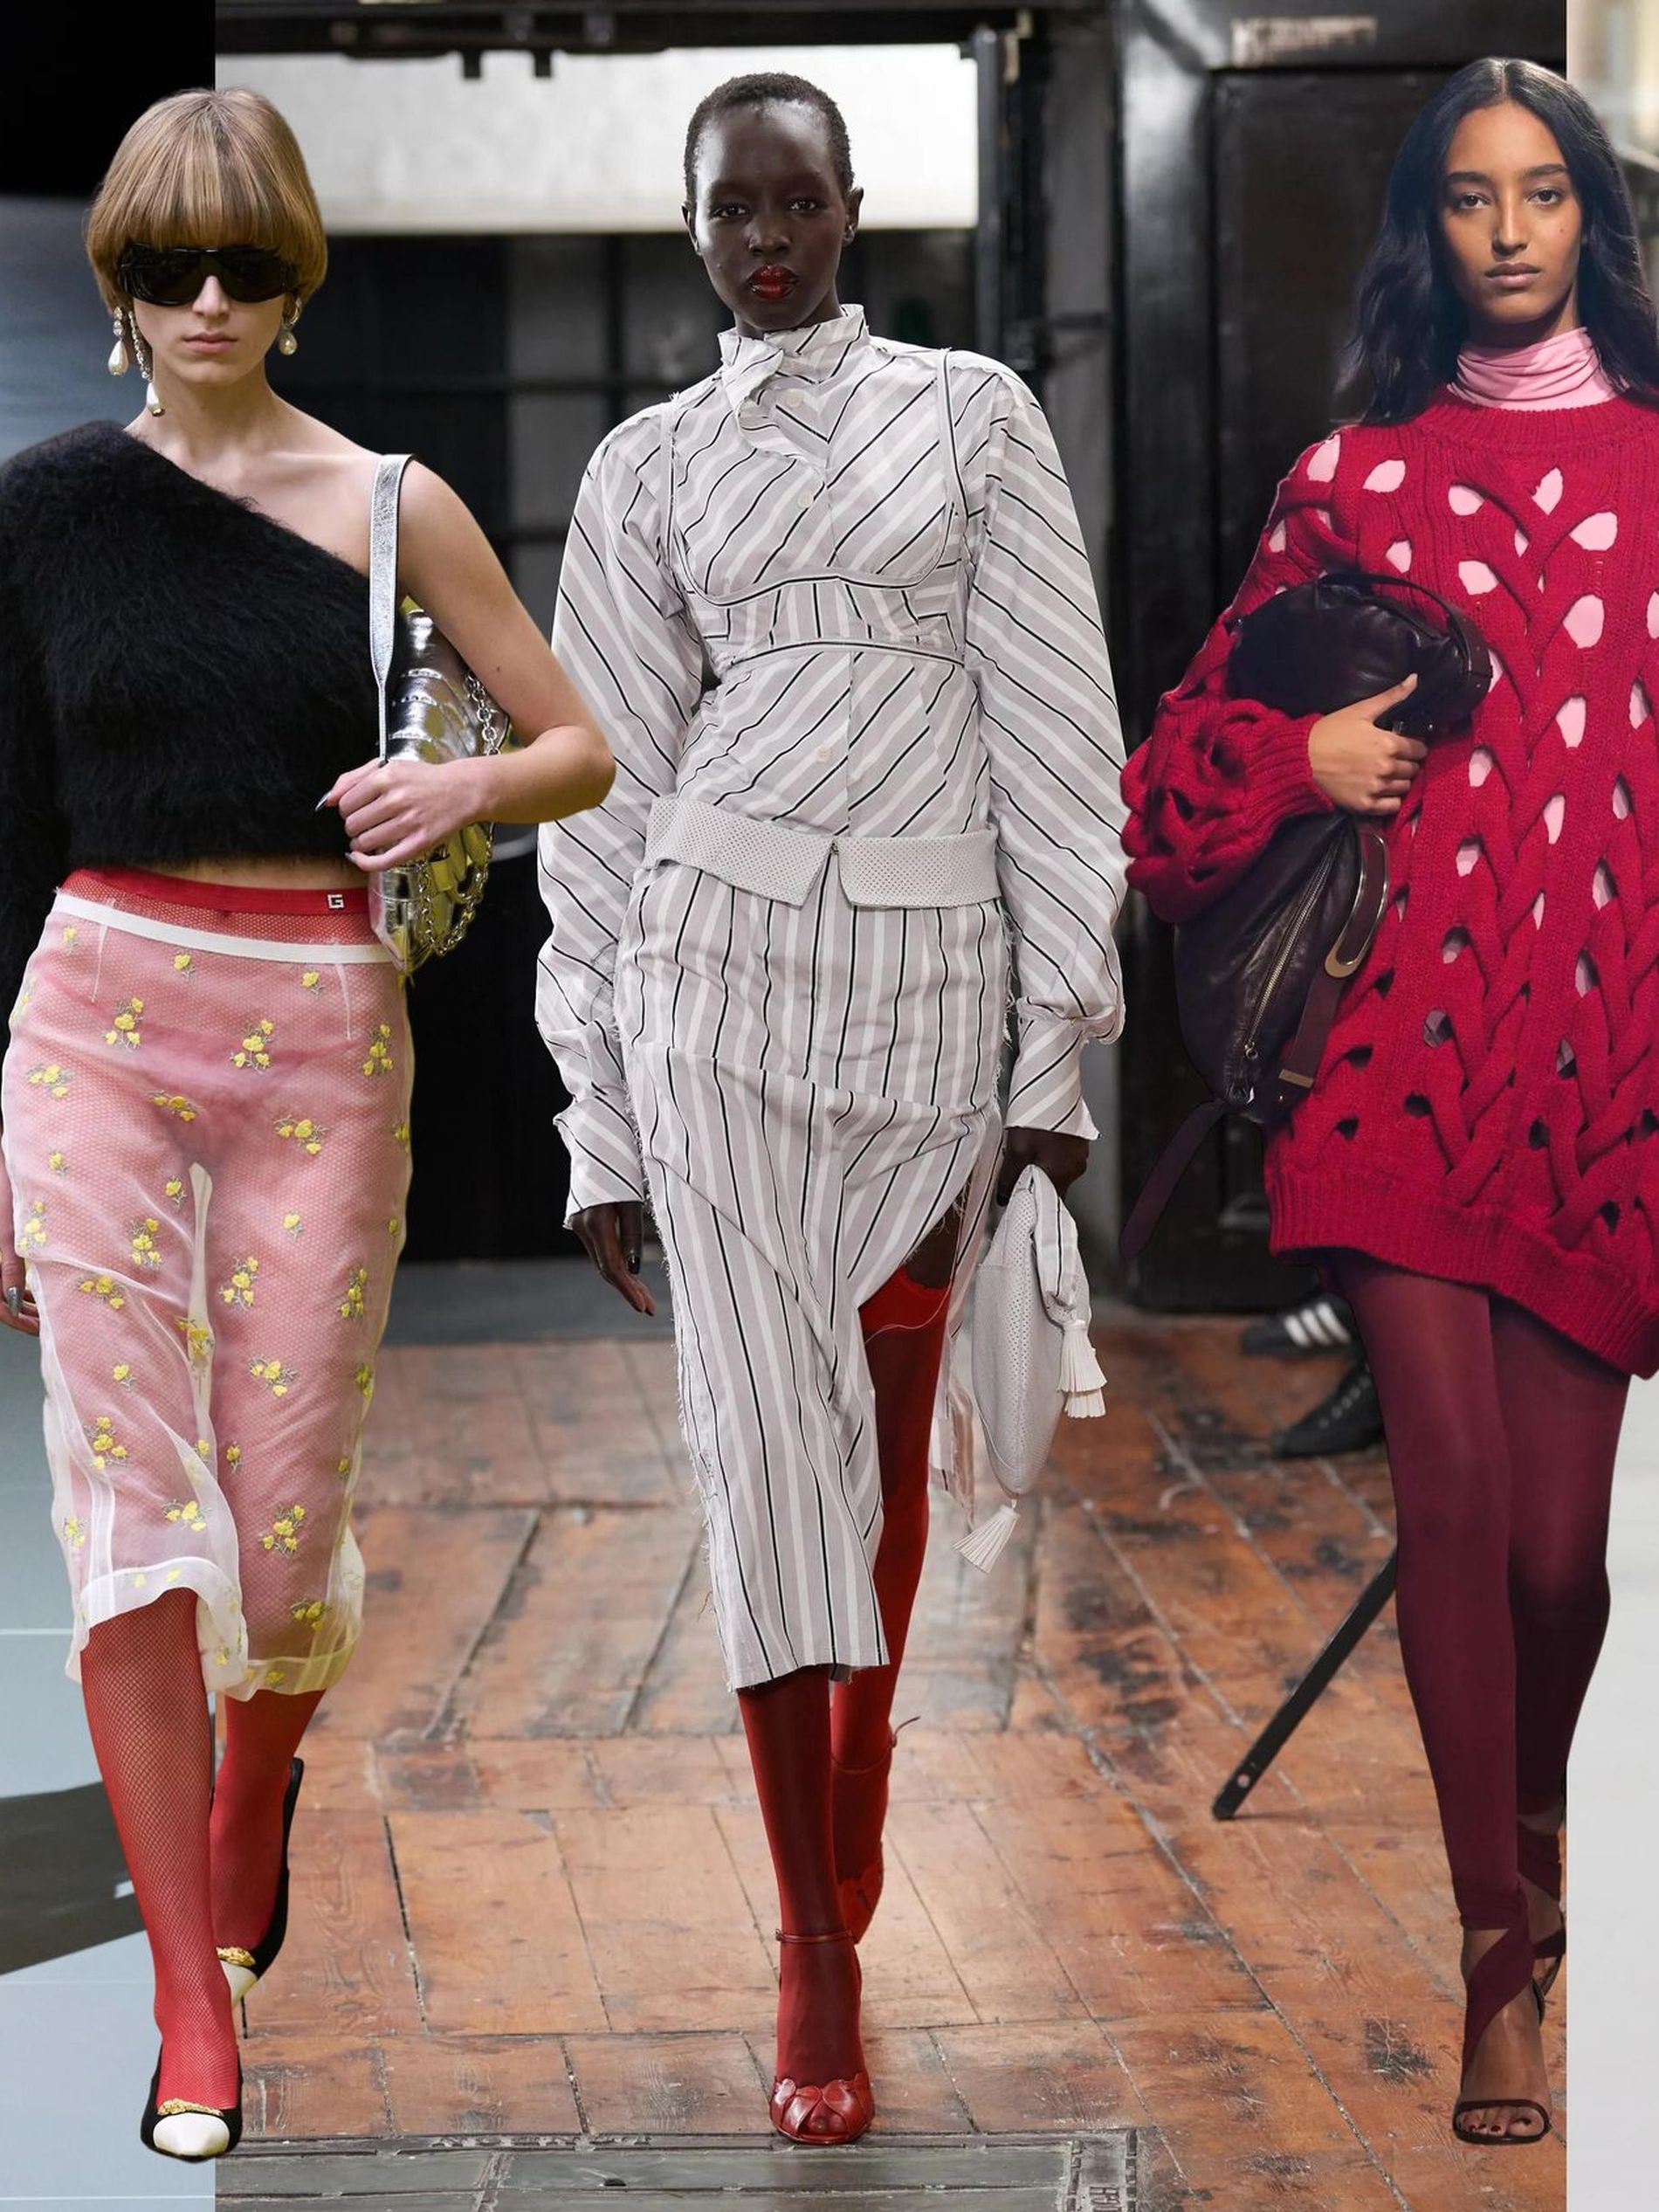 Stockings are red hot off the runway this season - Vogue Scandinavia